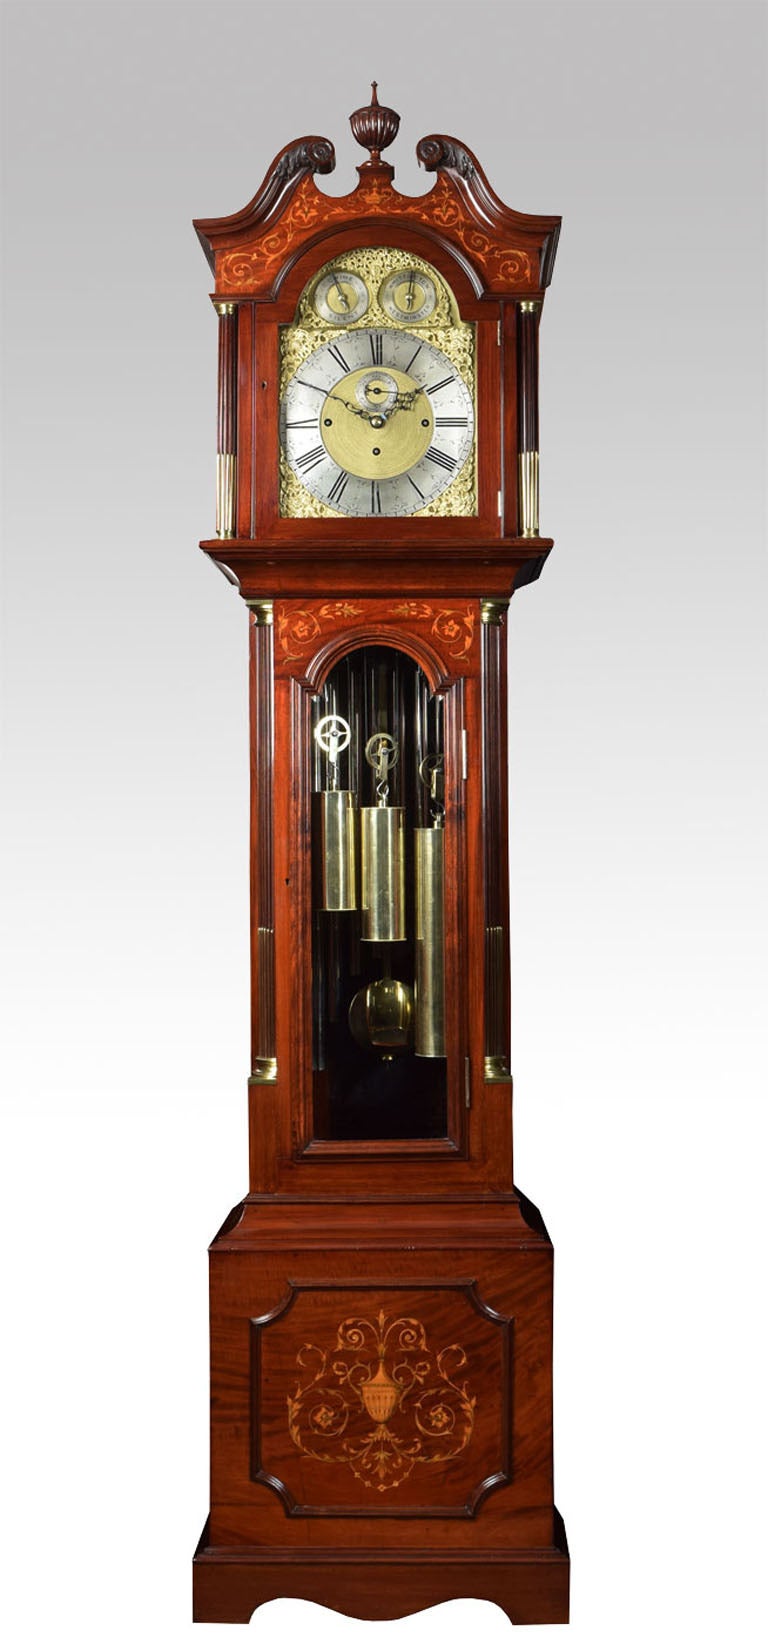 Edwardian mahogany inlaid tubular chiming longcase clock the case having a swan neck pediment with central turned finial over arched bevelled glazed hood door flanked by fluted pillars finely inlaid with tendrils and flowers, and leaf decoration the